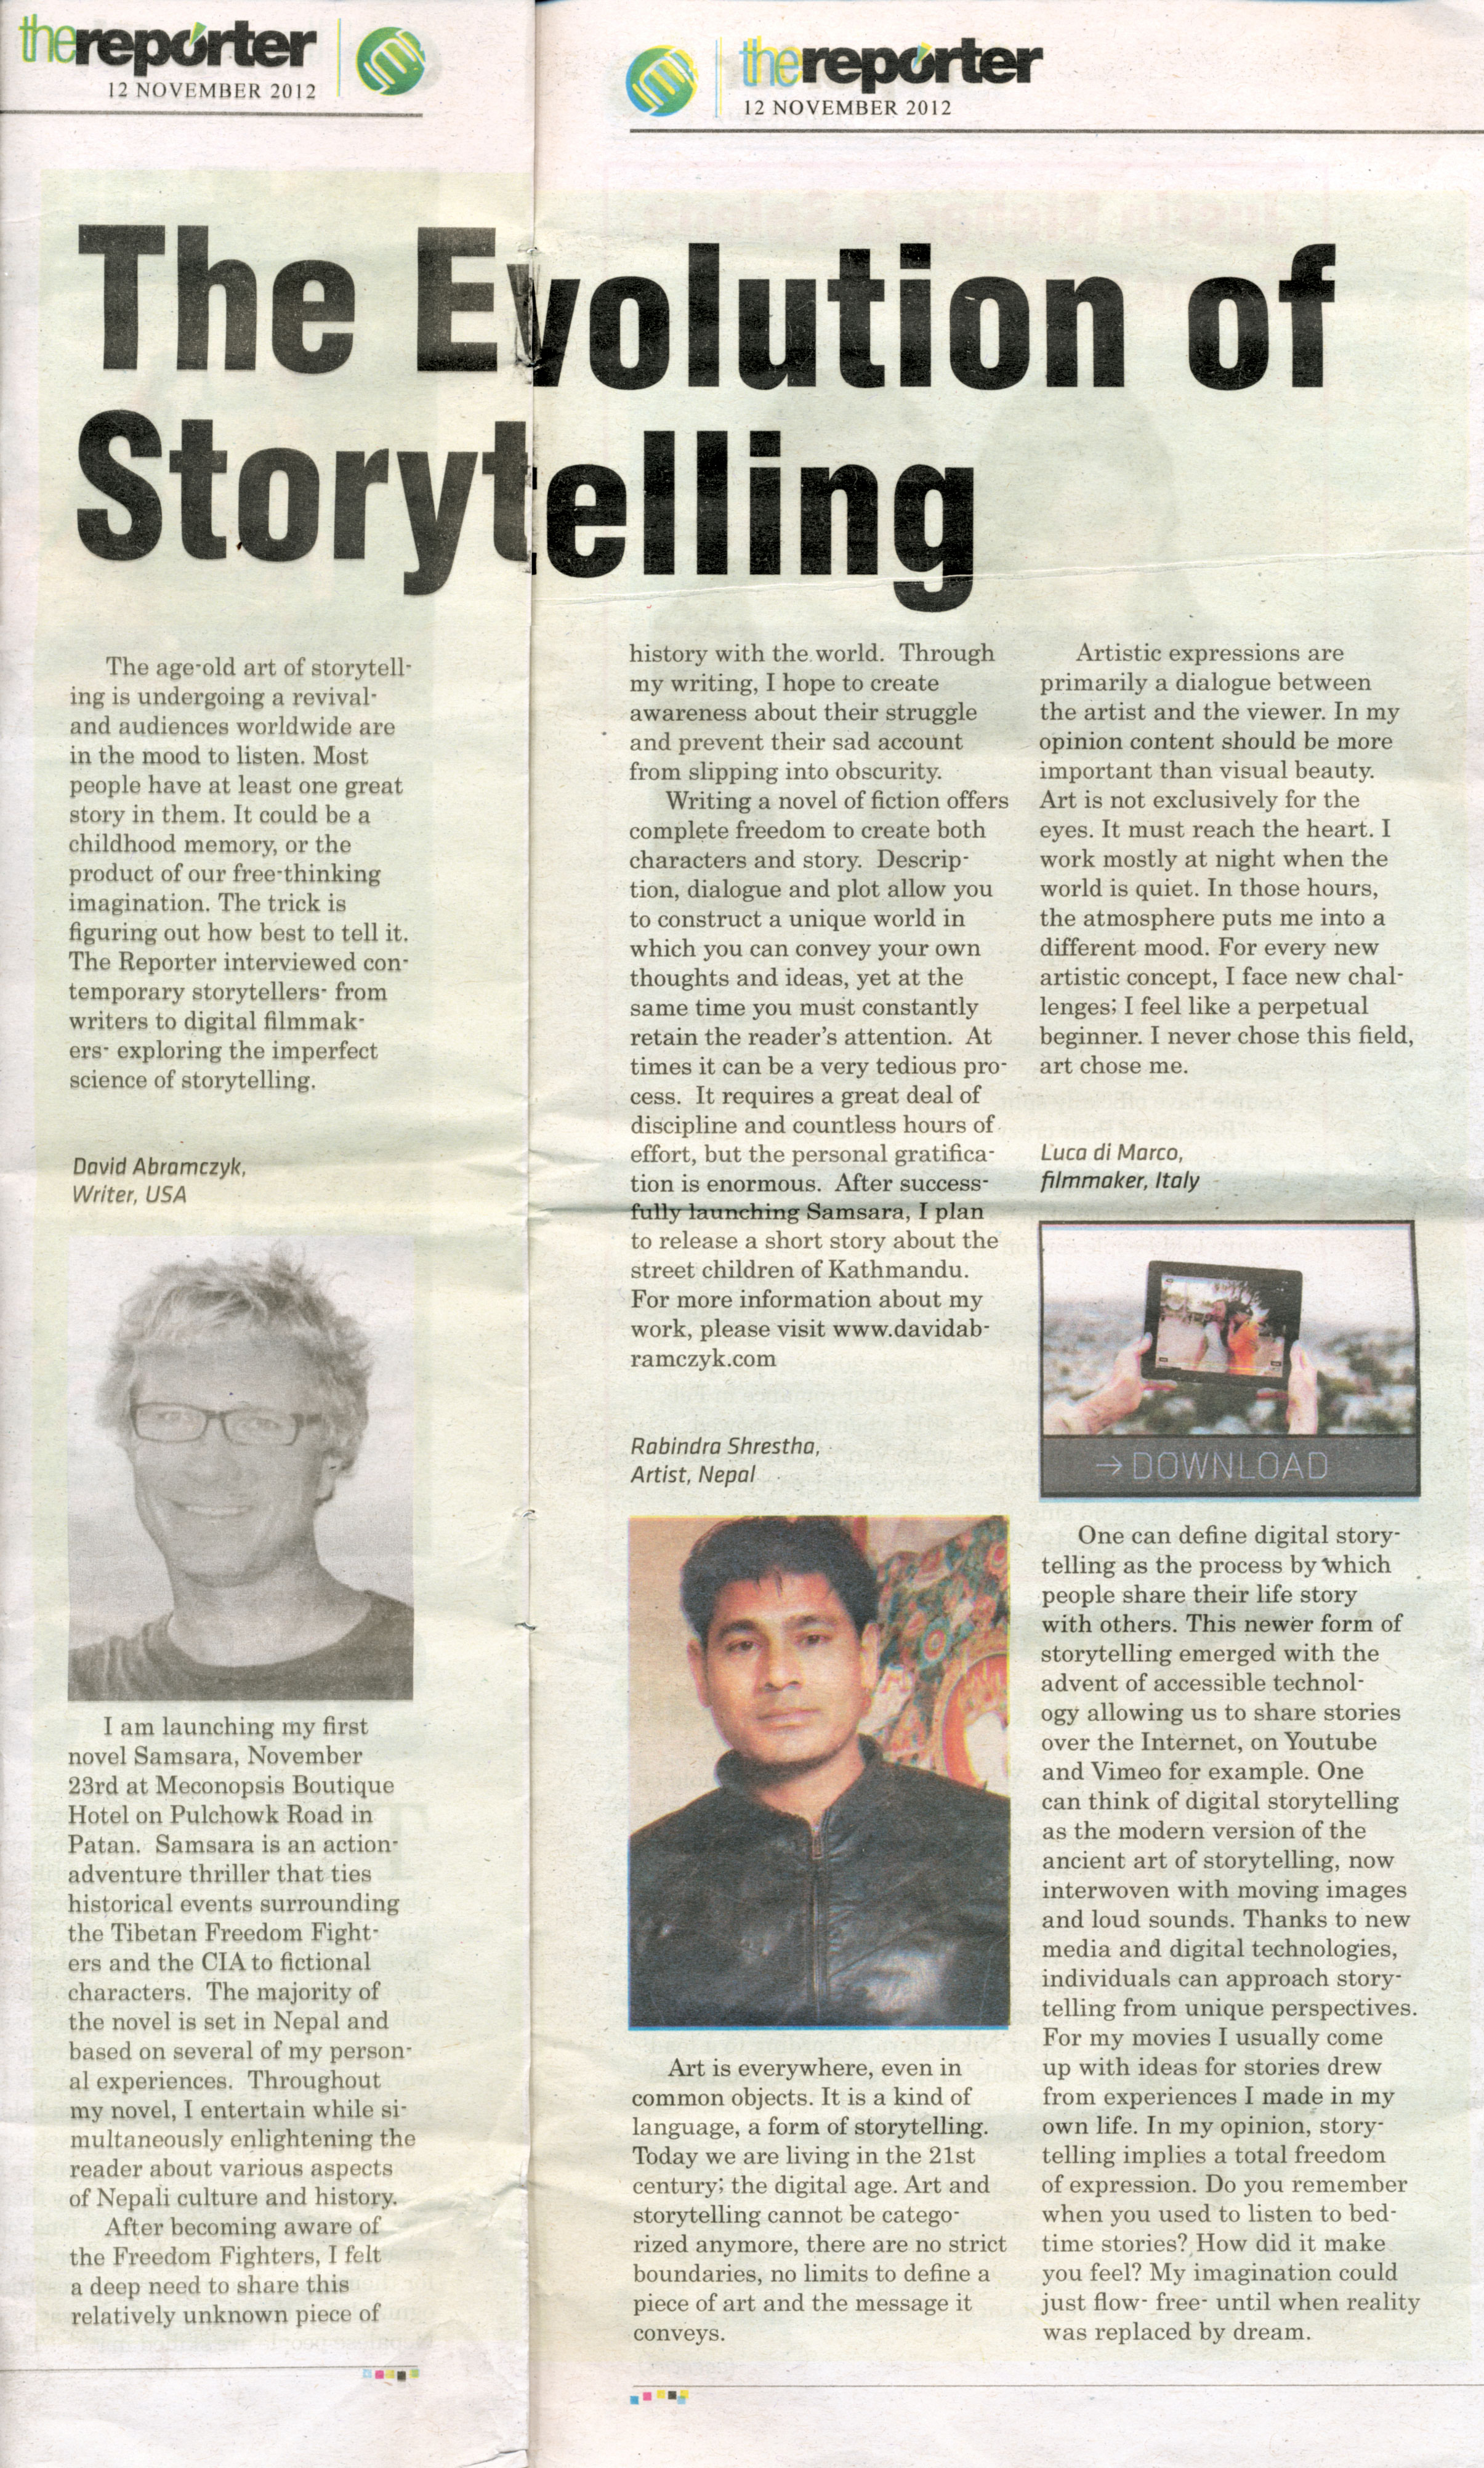 “Evolution of Storytelling” as featured in The Reporter Magazine